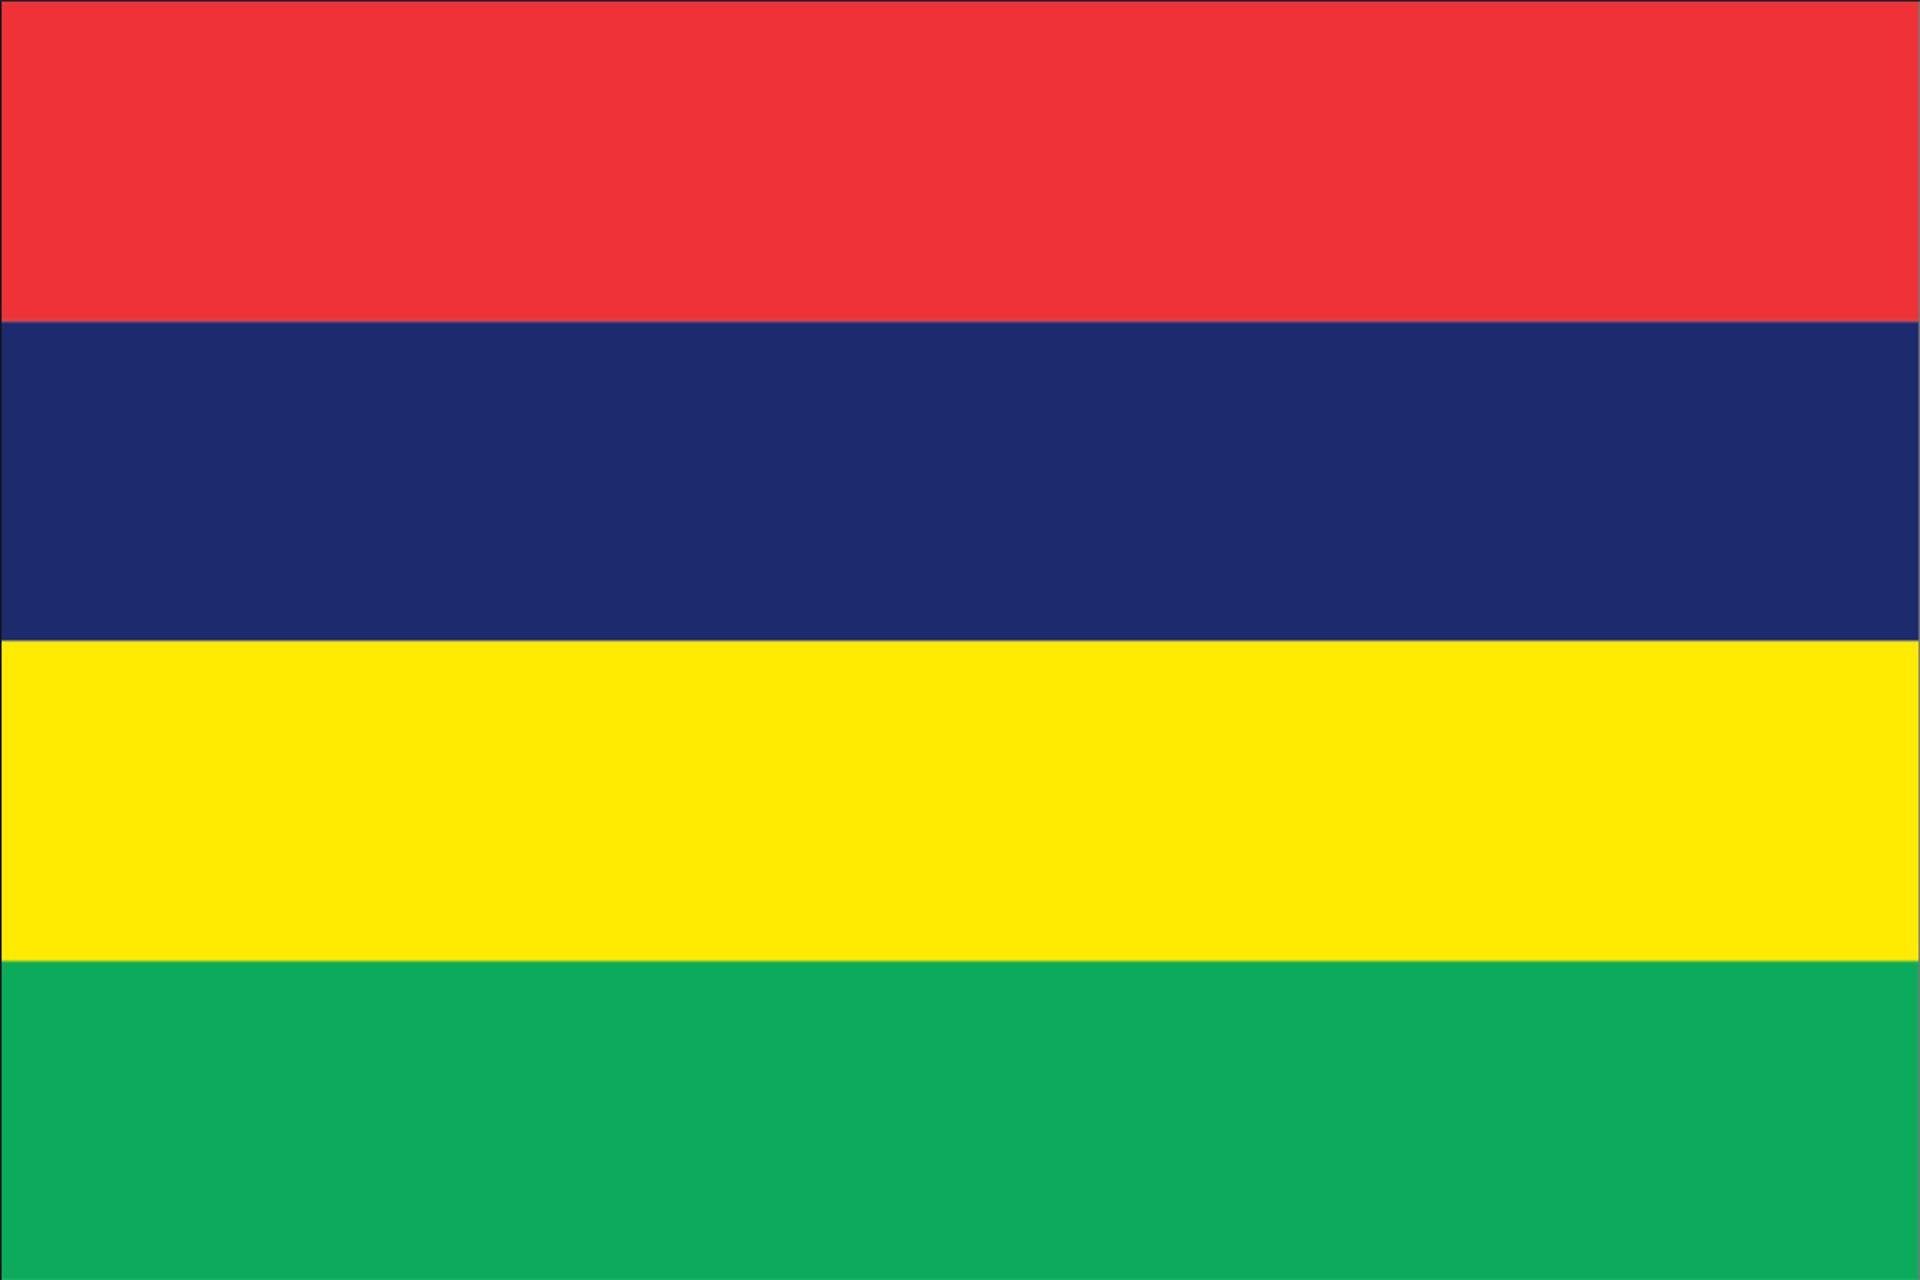 g/m² flaggenmeer 110 Flagge Mauritius Flagge Querformat